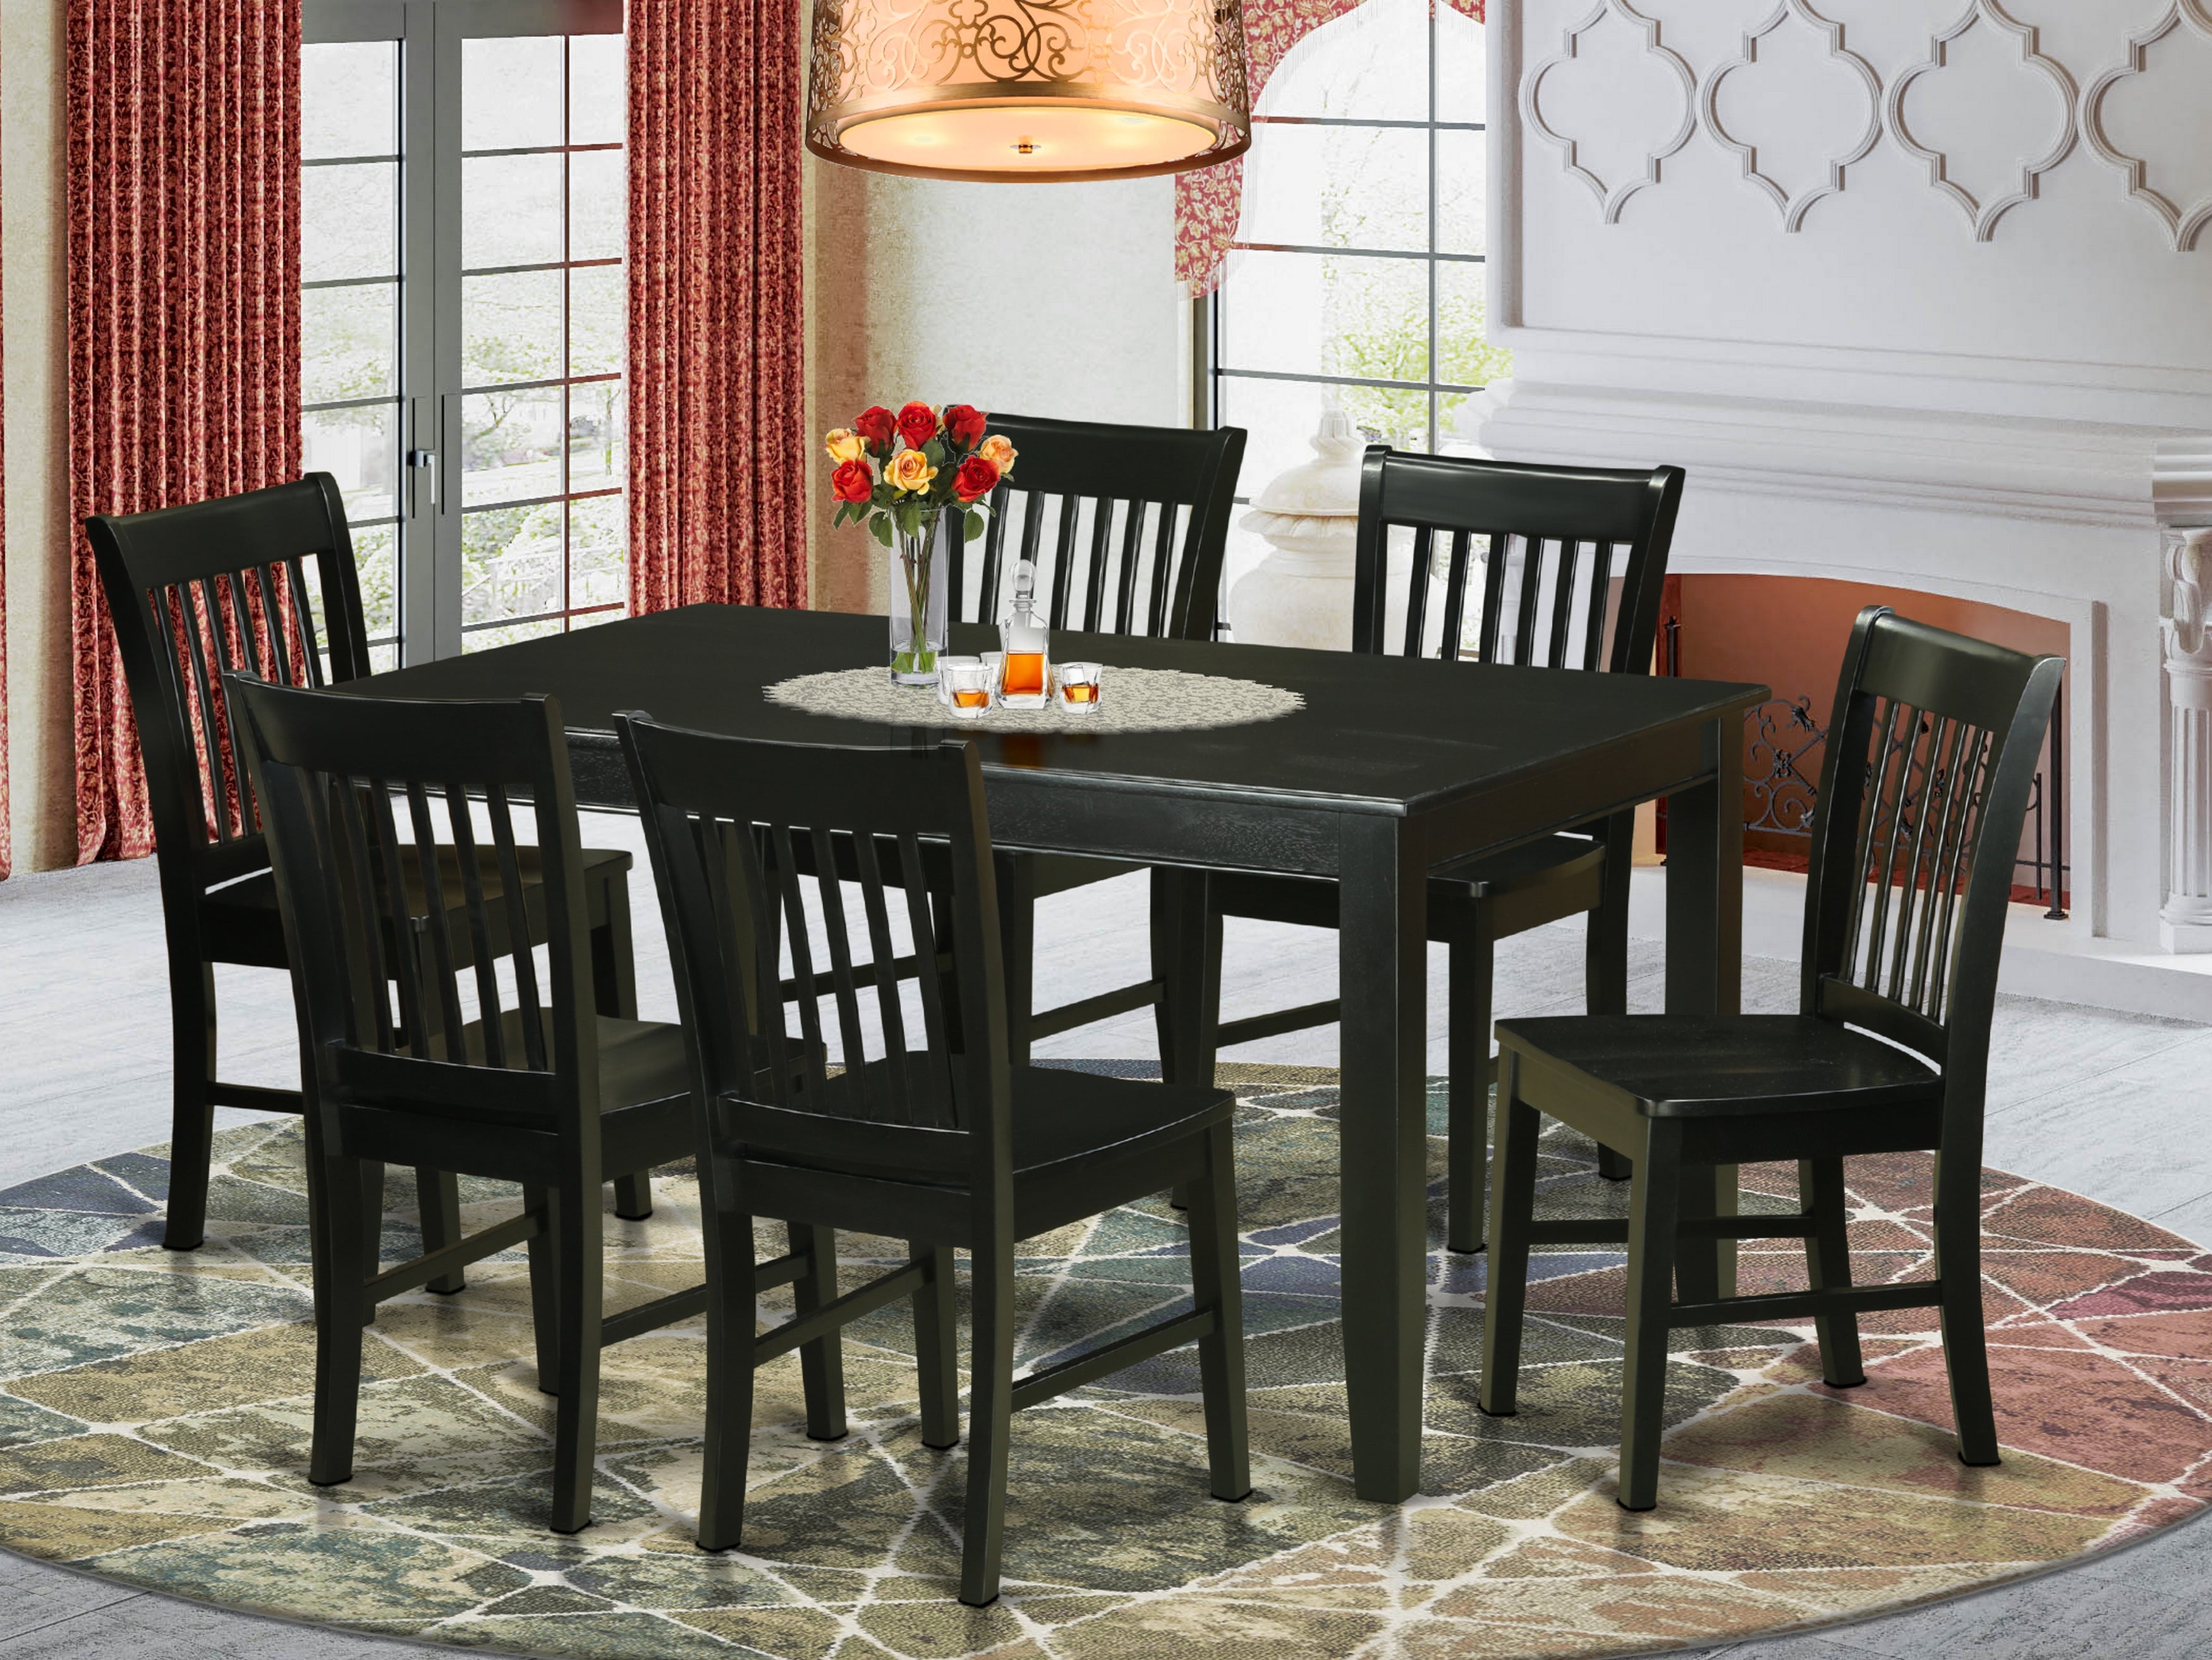 Dudley 7 Pc Black Dining room Kitchen Table and 6 Slat Back Chairs Set